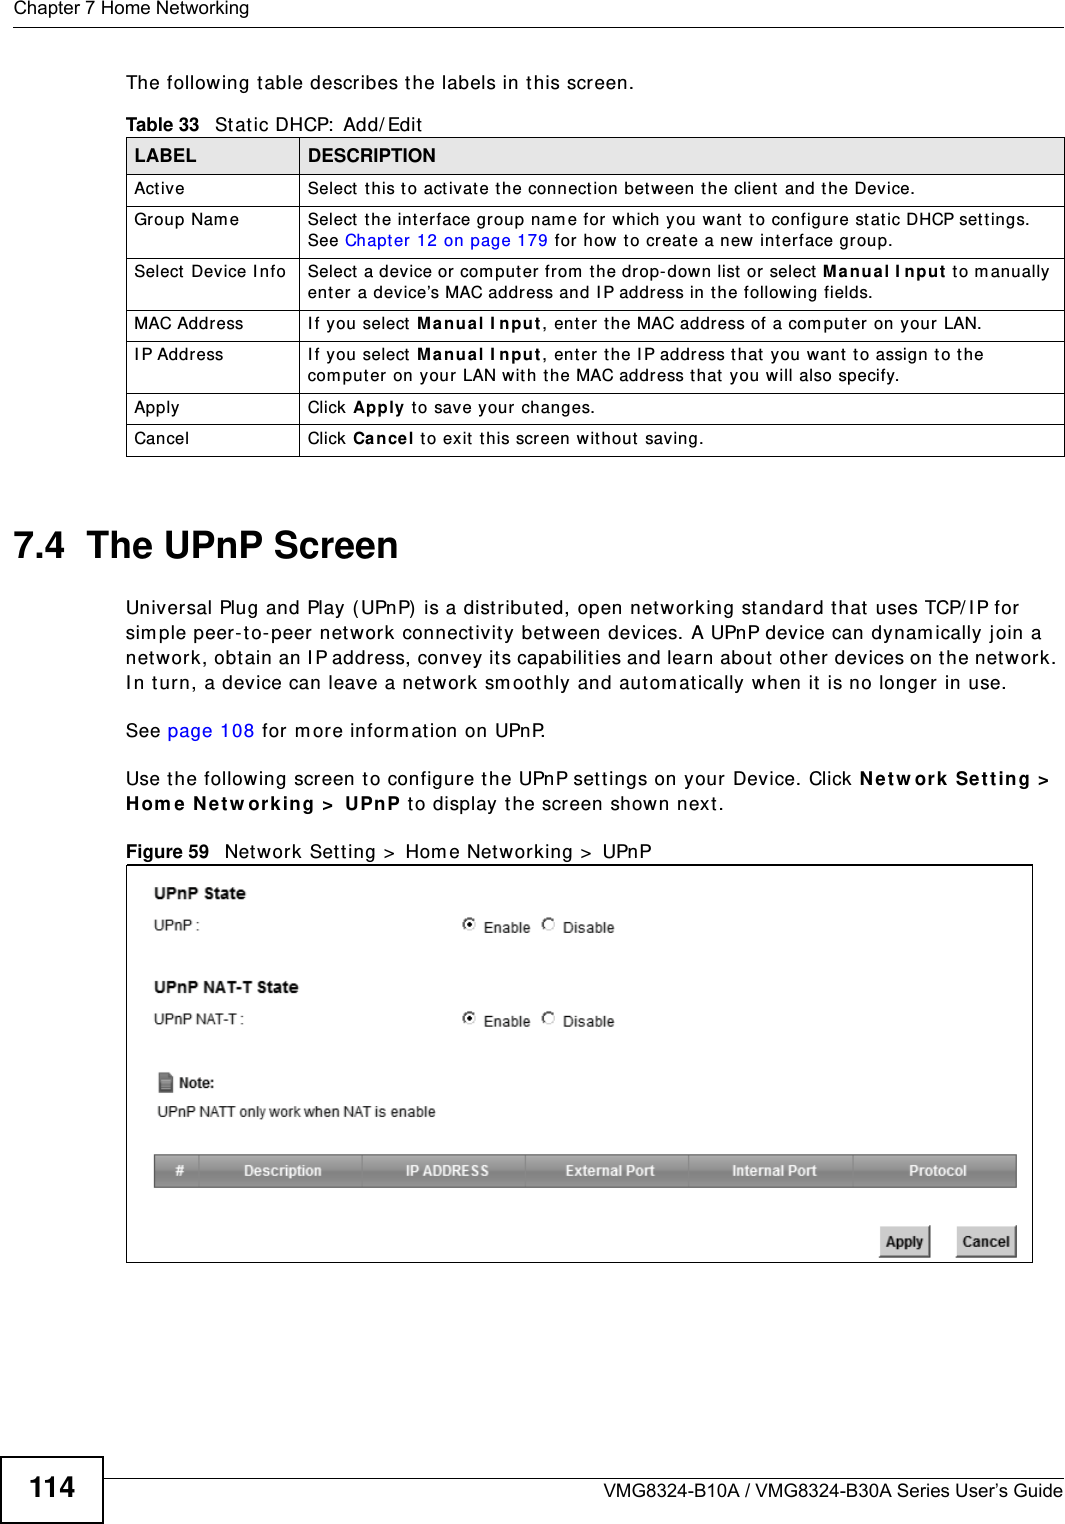 Chapter 7 Home NetworkingVMG8324-B10A / VMG8324-B30A Series User’s Guide114The following t able describes t he labels in this screen.7.4  The UPnP ScreenUniversal Plug and Play ( UPnP)  is a distribut ed, open net w orking standard that uses TCP/ I P for  sim ple peer-t o- peer net w ork connect ivity between devices. A UPnP device can dynam ically j oin a net work, obt ain an I P address, convey it s capabilit ies and learn about  ot her devices on t he net w ork. I n t urn, a device can leave a net work sm oothly and aut om at ically when it  is no longer in use.See page 108 for m ore inform ation on UPnP.Use t he following screen t o configure t he UPnP sett ings on your Device. Click N et w ork  Set t ing &gt;  Hom e  N e t w orking &gt;  UPn P t o display the screen shown next .Figure 59   Net work Set t ing &gt;  Hom e Net w orking &gt;  UPnPTable 33   St atic DHCP:  Add/ EditLABEL DESCRIPTIONAct iv e Select  t his t o act ivat e t he connect ion bet ween t he client  and the Device.Group Nam e Select  the interface group nam e for which you w ant  t o configur e st at ic DHCP settings. See Chapt er 12 on page 179 for how  t o creat e a new  int erface group.Select  Device  I nfo Select a device or com puter fr om  the drop-down list  or select Manu a l I n pu t  t o m anually enter a device’s MAC address and I P address in t he following fields.MAC Address I f you select  M a n ua l I npu t , ent er  the MAC address of a com puter on your LAN.I P Address I f you select  M a nua l I npu t , enter t he I P address that  you want  to assign to the com put er  on your LAN w it h the MAC address t hat you will also specify.Apply Click Apply t o save your changes.Cancel Click Ca ncel t o exit  this screen wit hout saving.